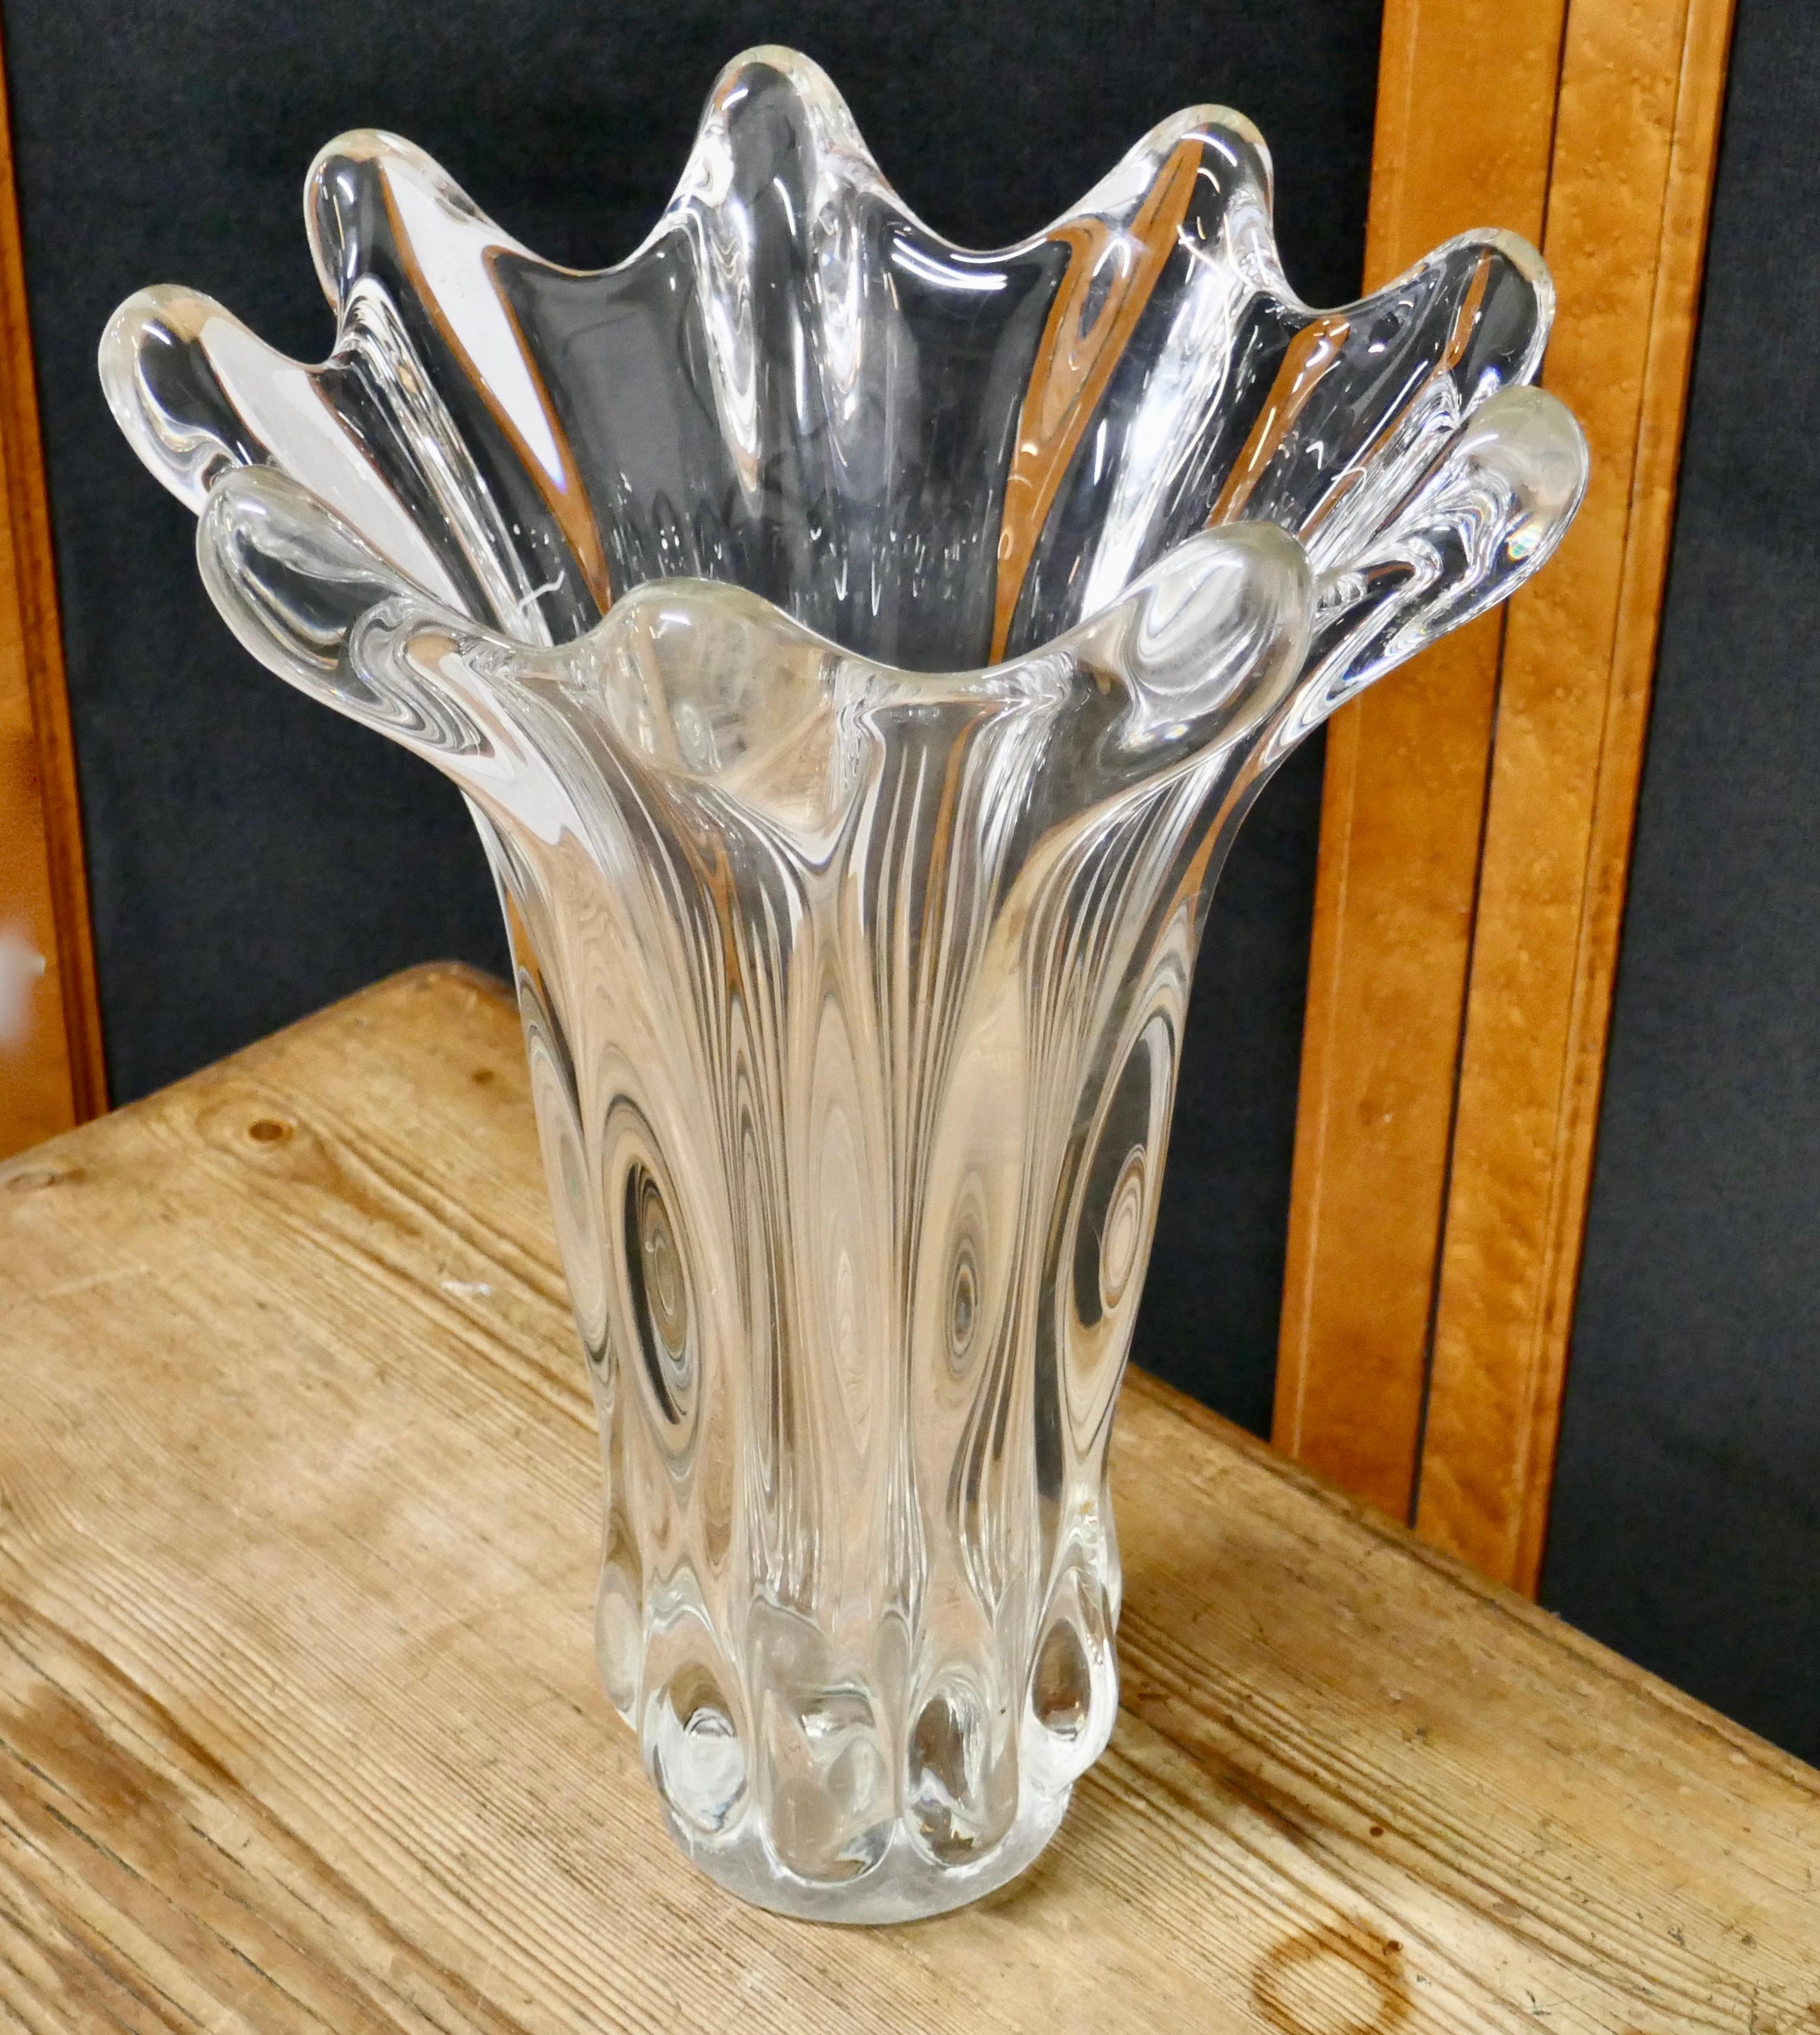 Midcentury hand blown crystal vase by Art Vannes
 
A stunning very heavy piece in natural crystal in a stylized floral shape design, made in the 1950s and marked Vannes Art on the bottom
The vase is in good condition, no chips cracks or repairs